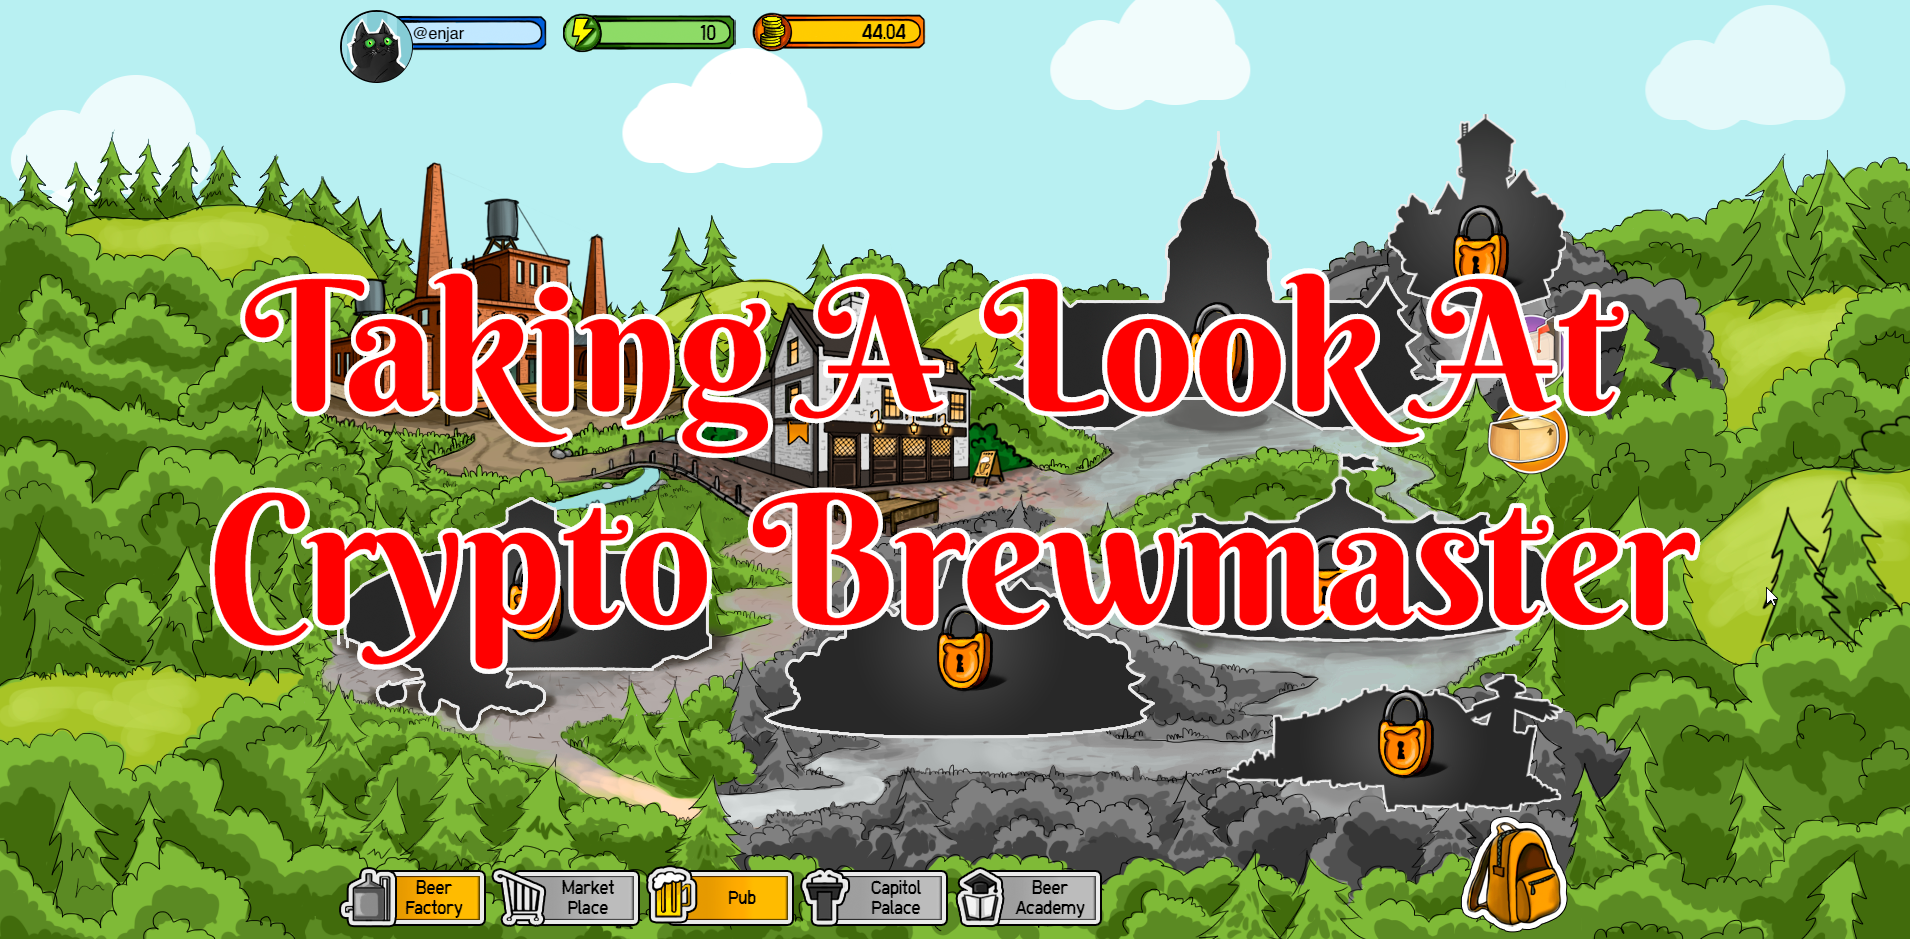 Crypto Brewmaster beer game blockchain hive.png